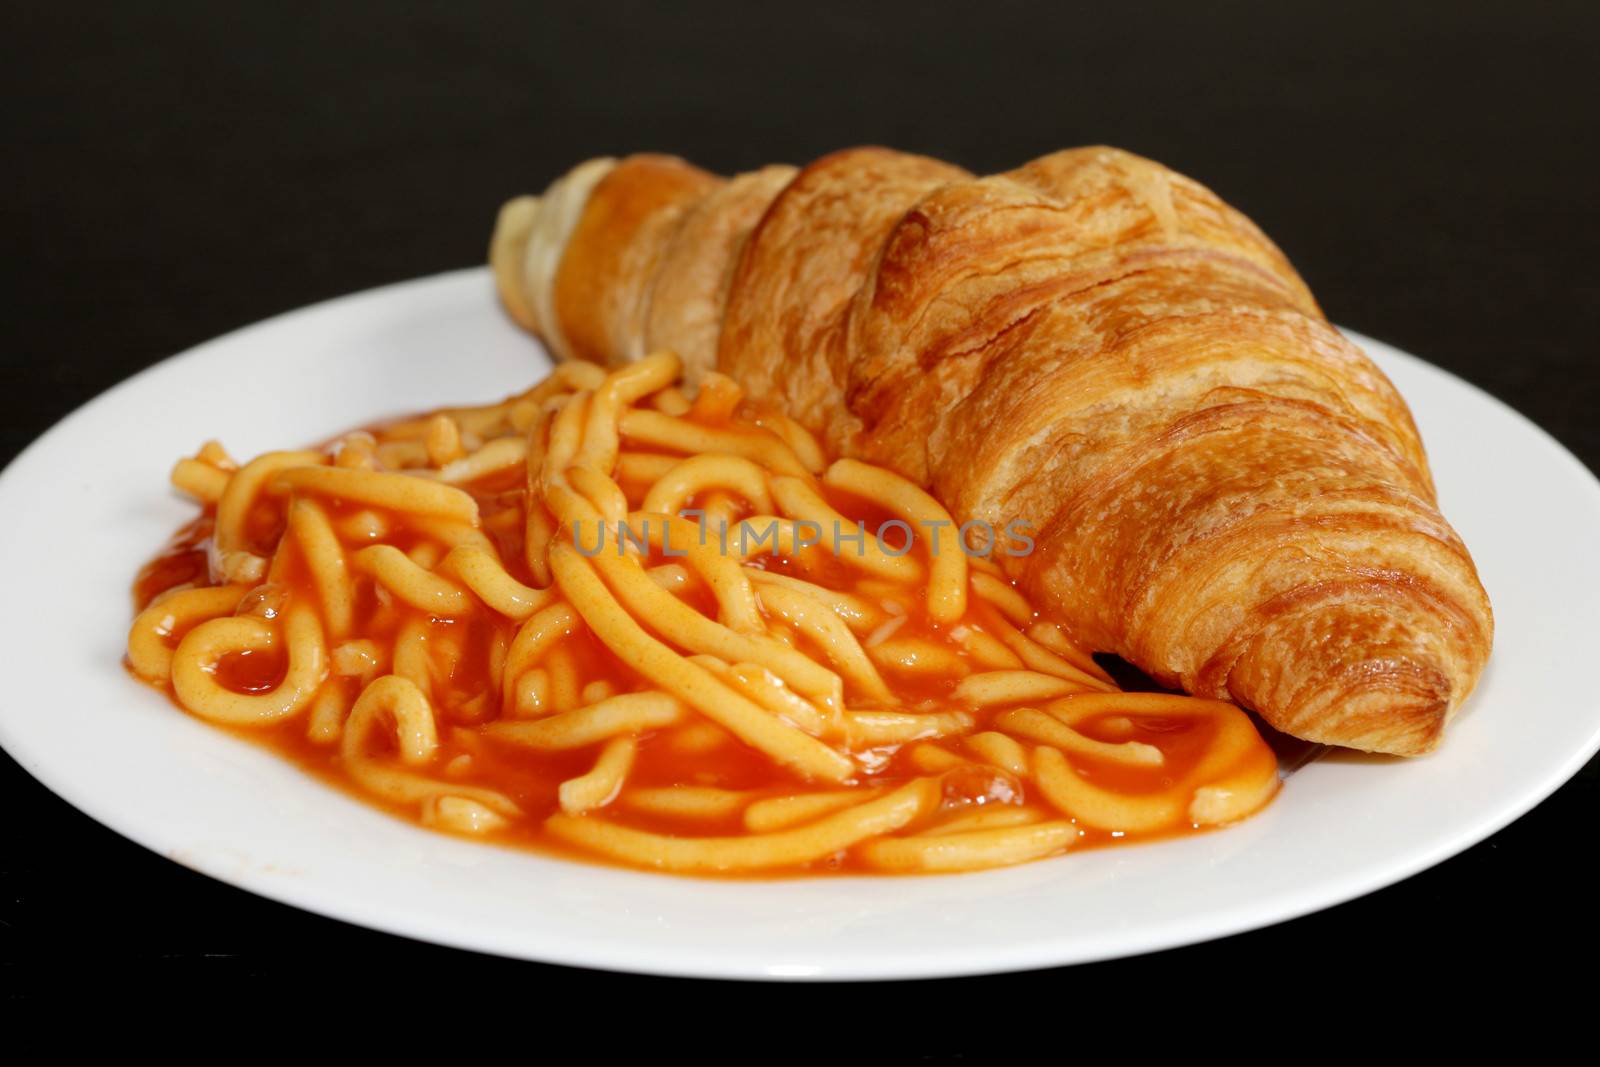 Croissant with Spaghetti by Whiteboxmedia